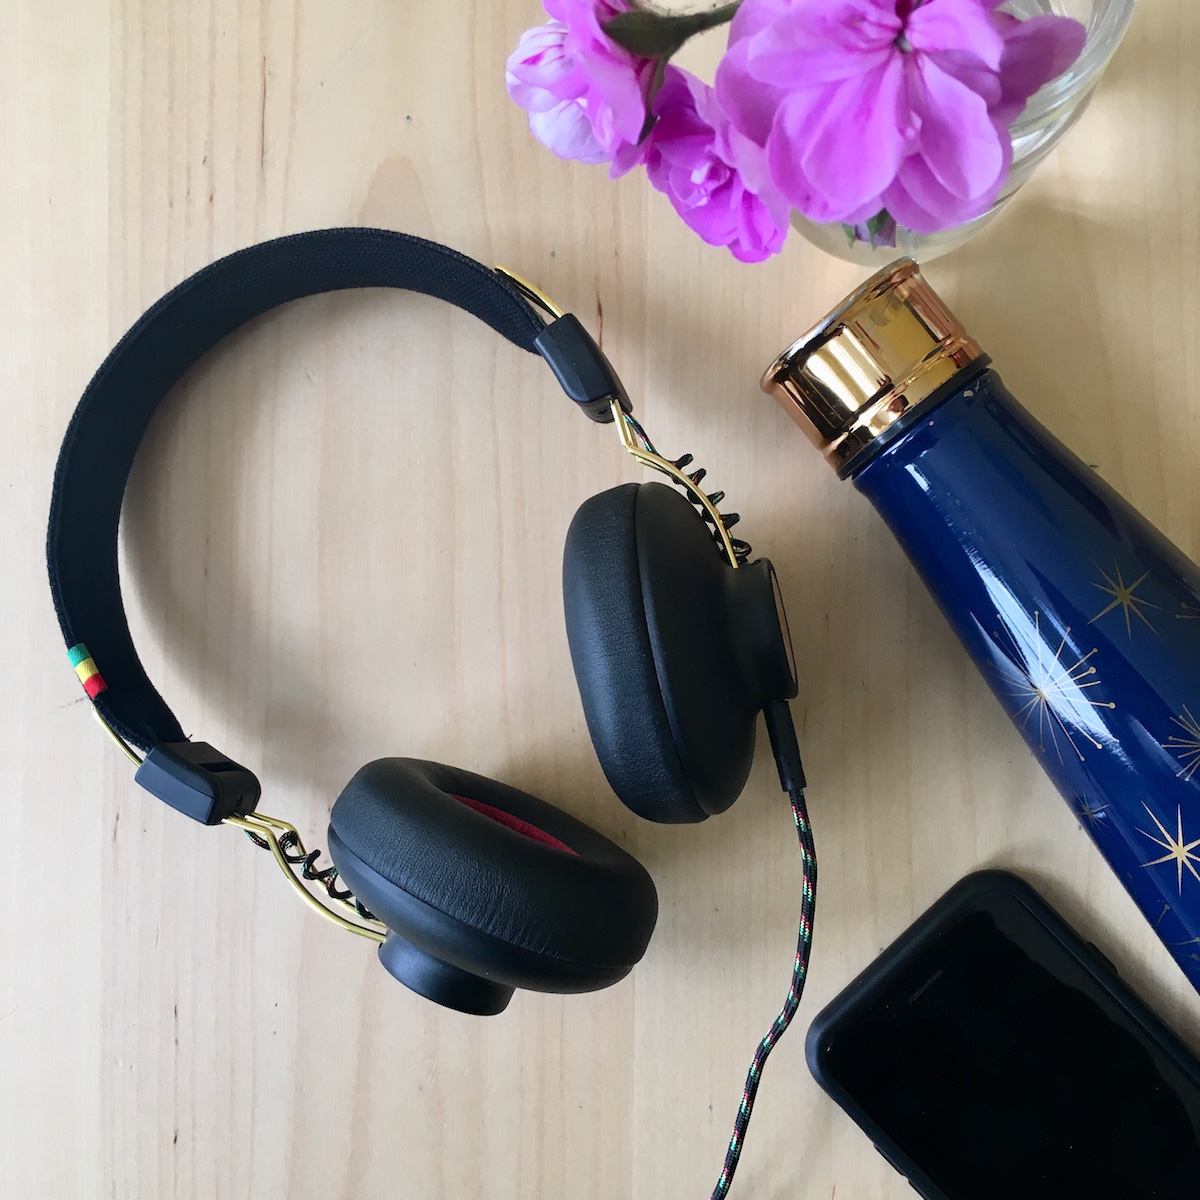 House of Marley Positive Vibrations 2 headphone review: A pair of on-ear headphones on a wooden surface net to a stainless steel water bottle, a phone, and a purple flower in a jar.